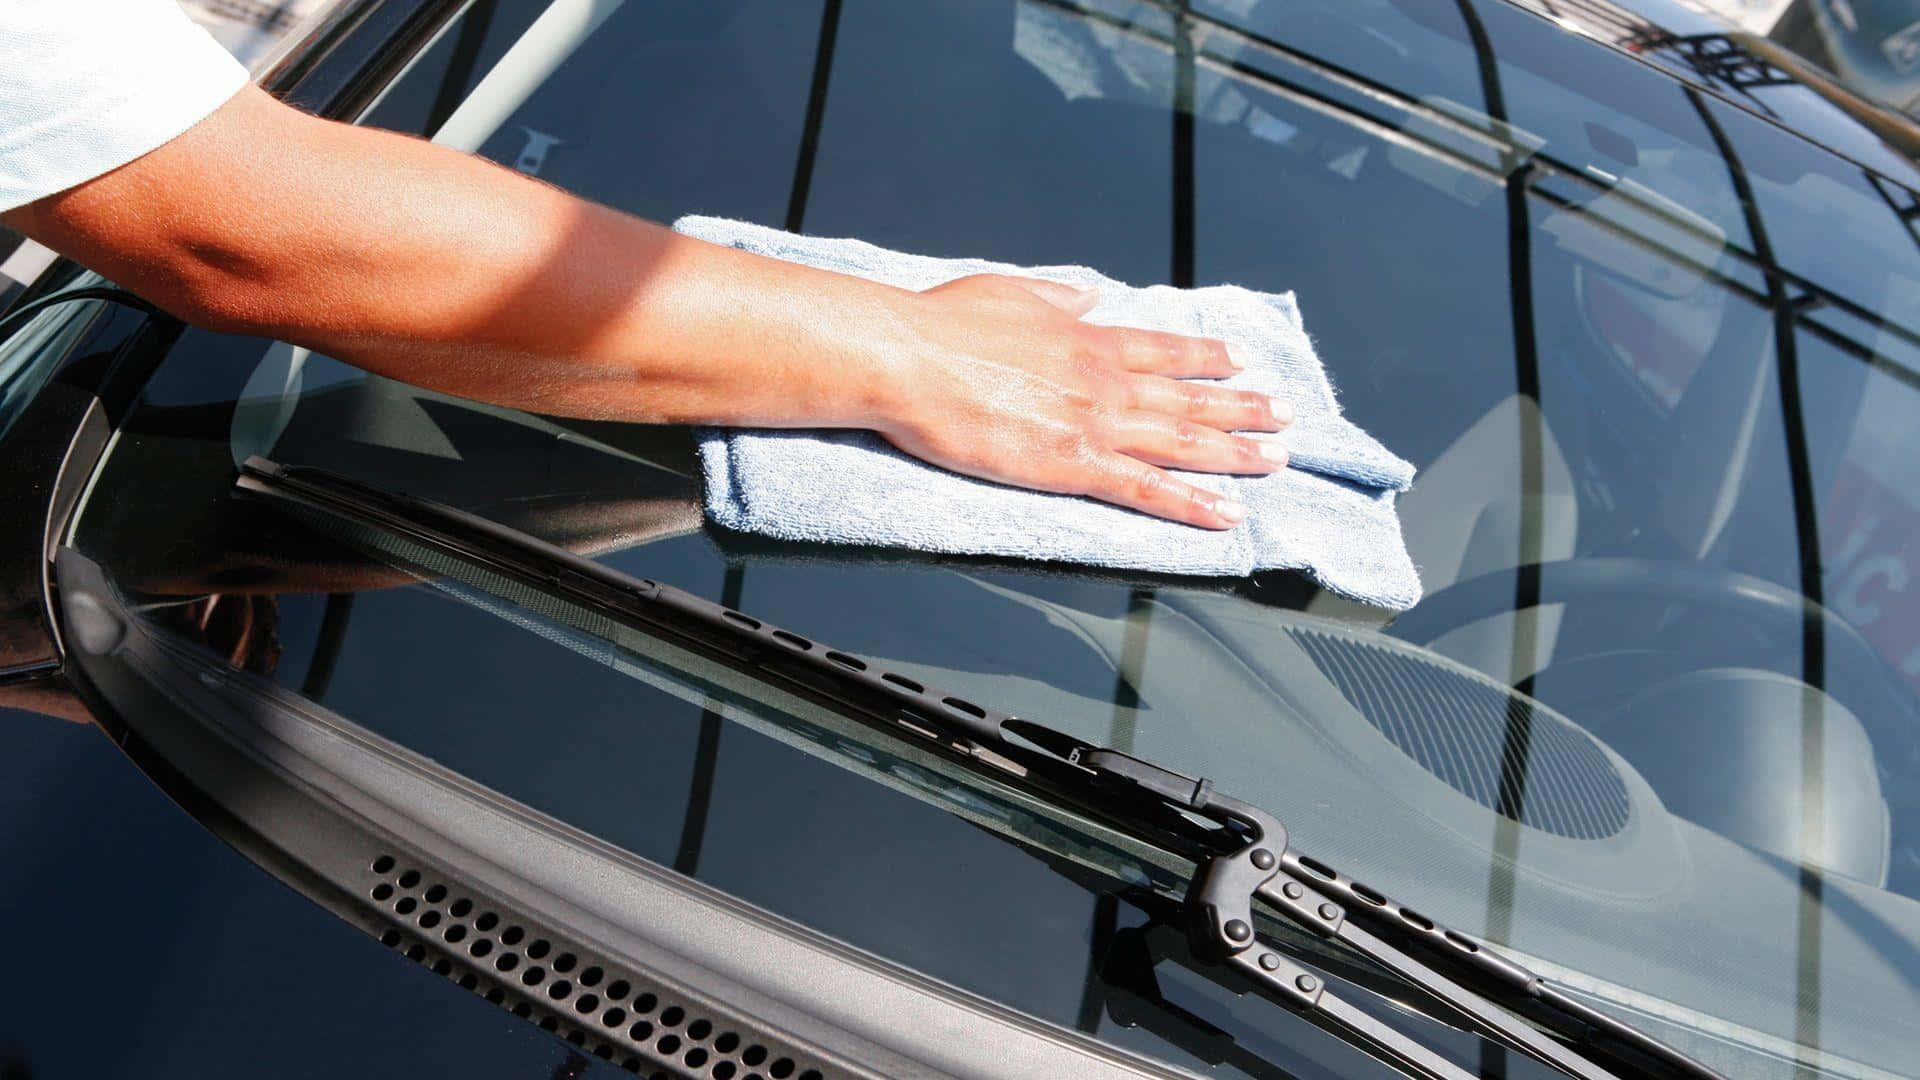 Get that clean, spotless shine with our professional car wash!